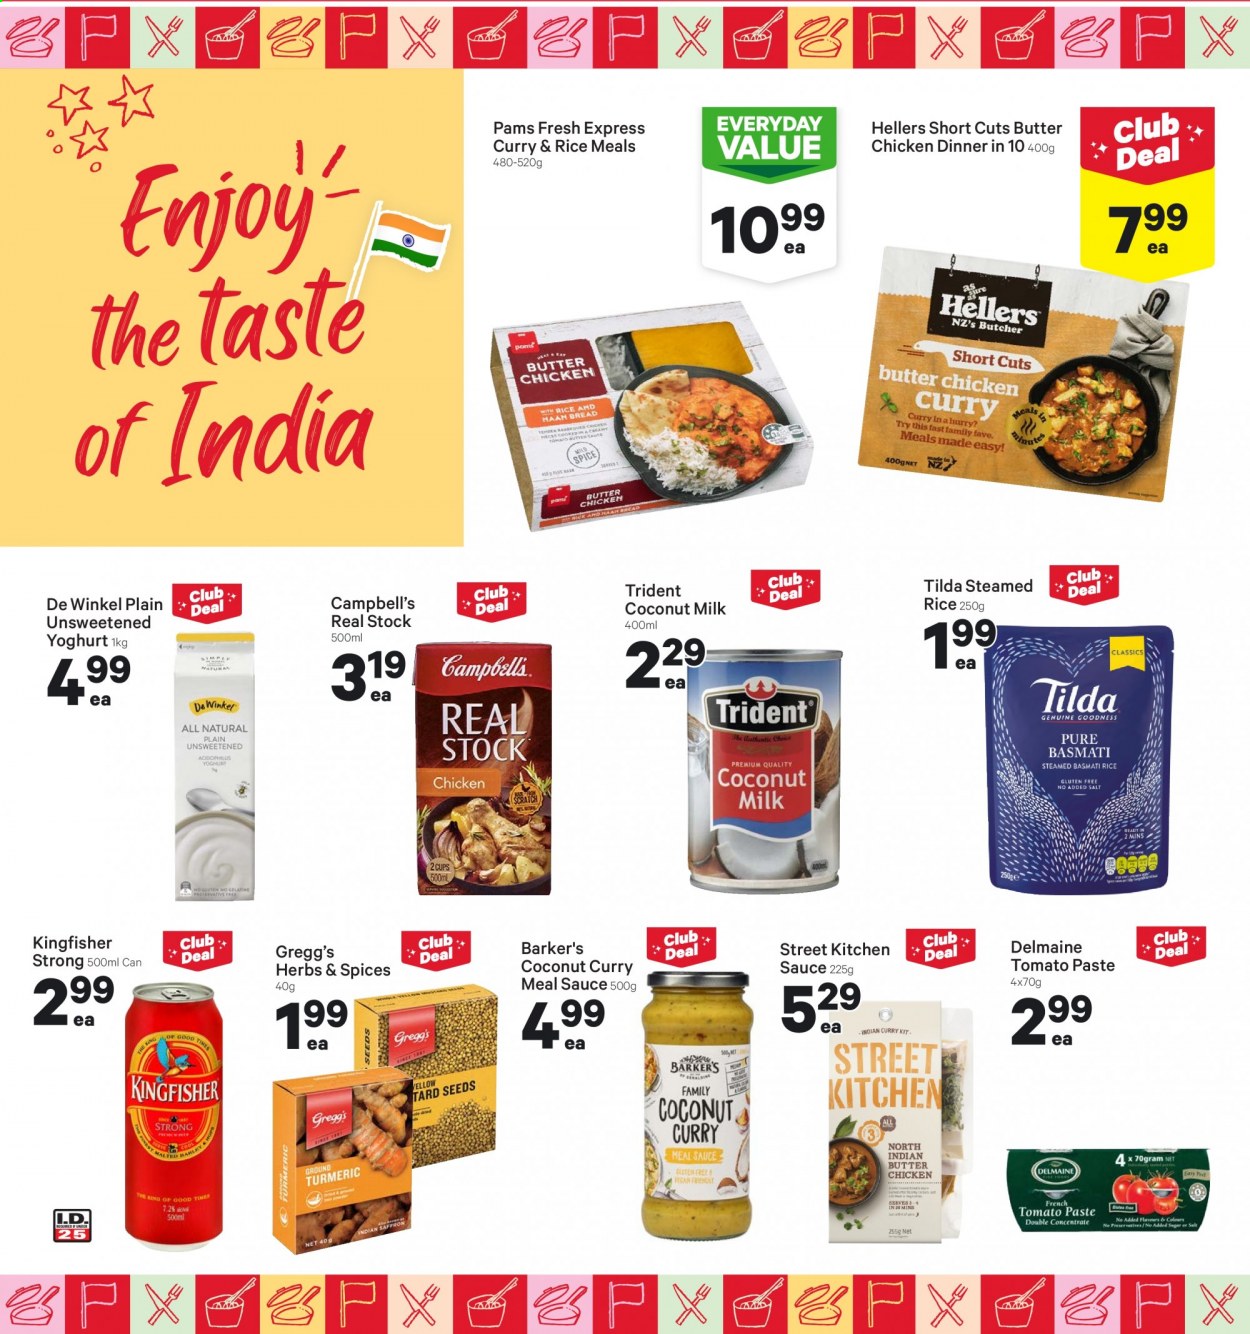 thumbnail - New World mailer - 16.08.2021 - 22.08.2021 - Sales products - bread, Campbell's, sauce, Delmaine, yoghurt, Trident, coconut milk, tomato paste, basmati rice, turmeric, spice, herbs. Page 3.